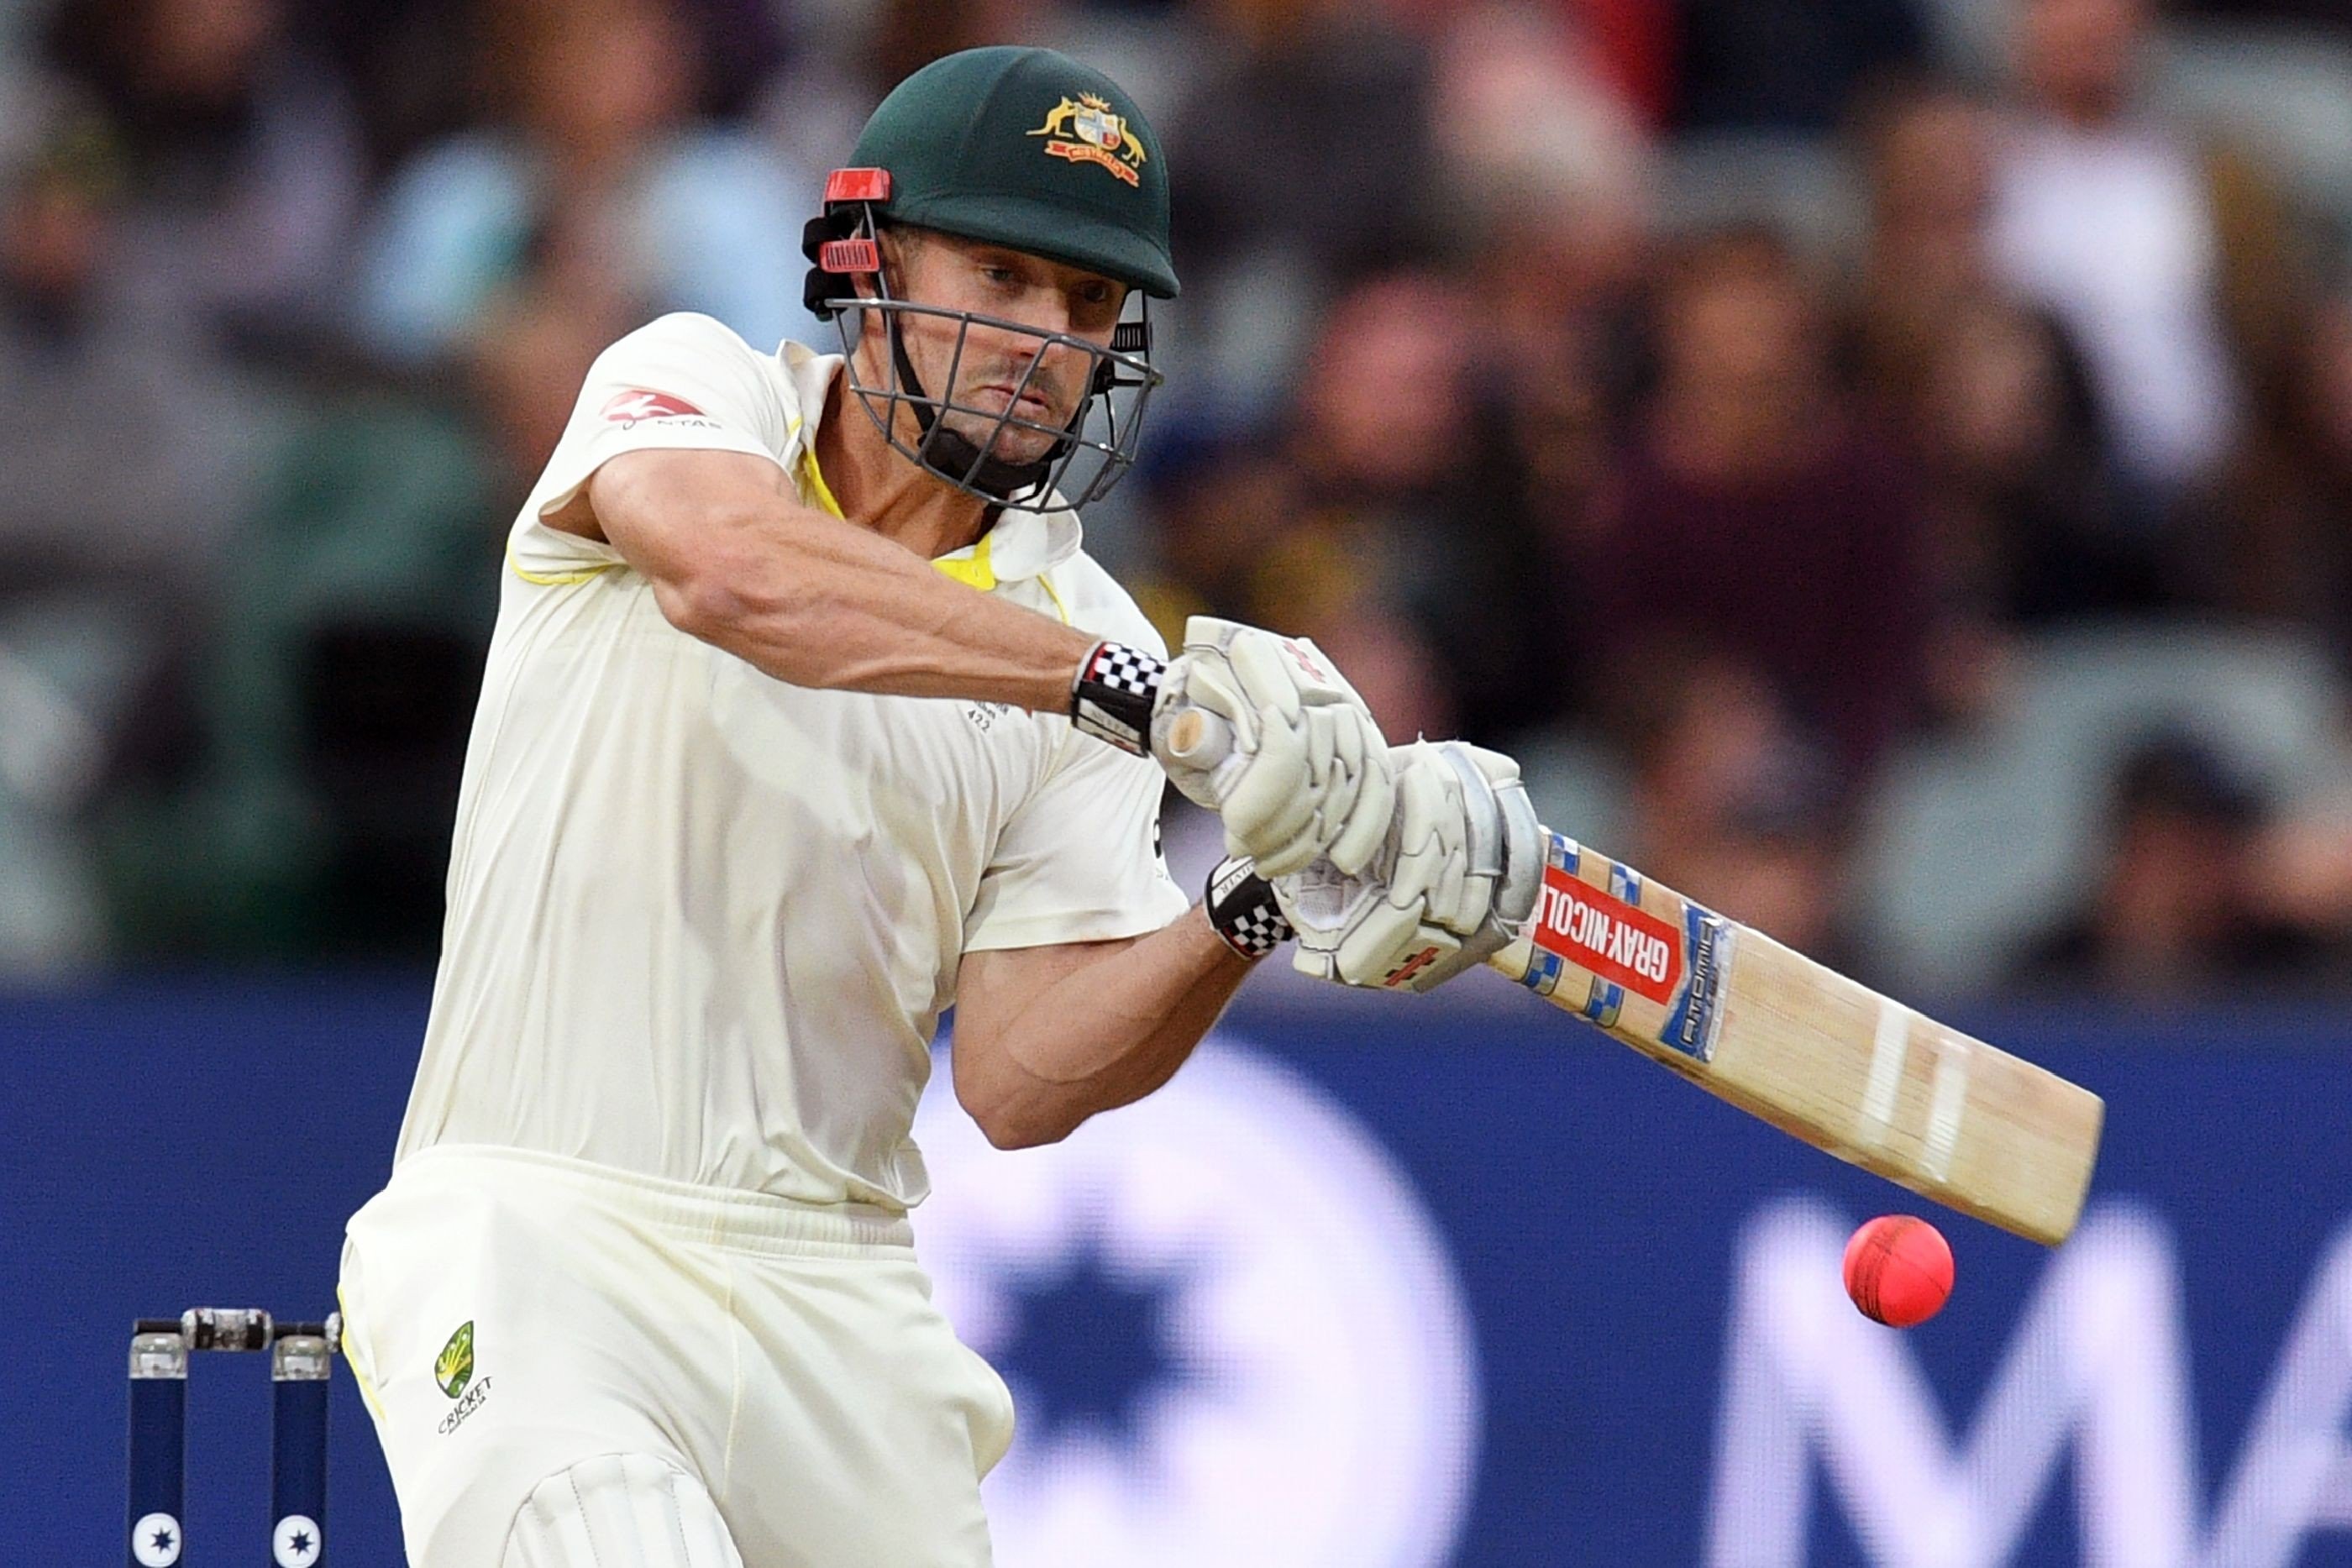 Australian batsman Shaun Marsh hit his first century for over a year and his first tonne against England. Photo: AFP